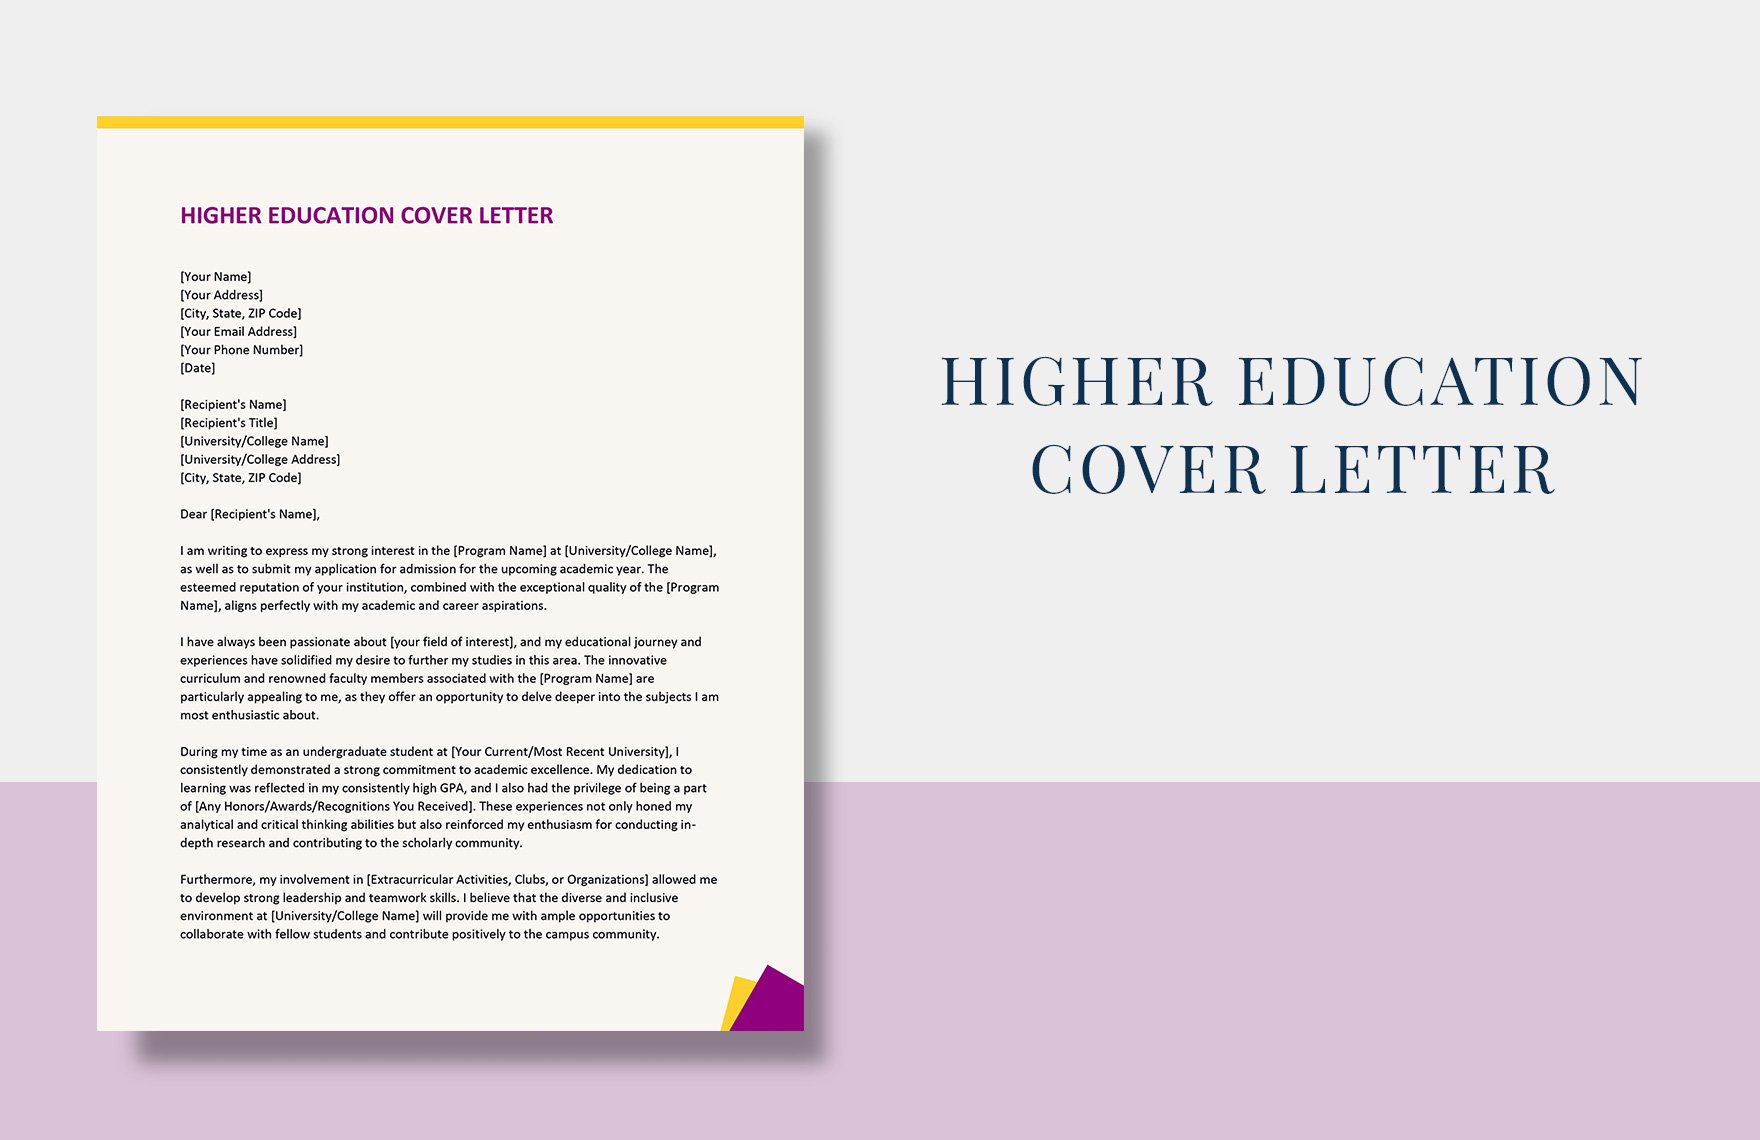 Higher Education Cover Letter in Word, Google Docs, Apple Pages